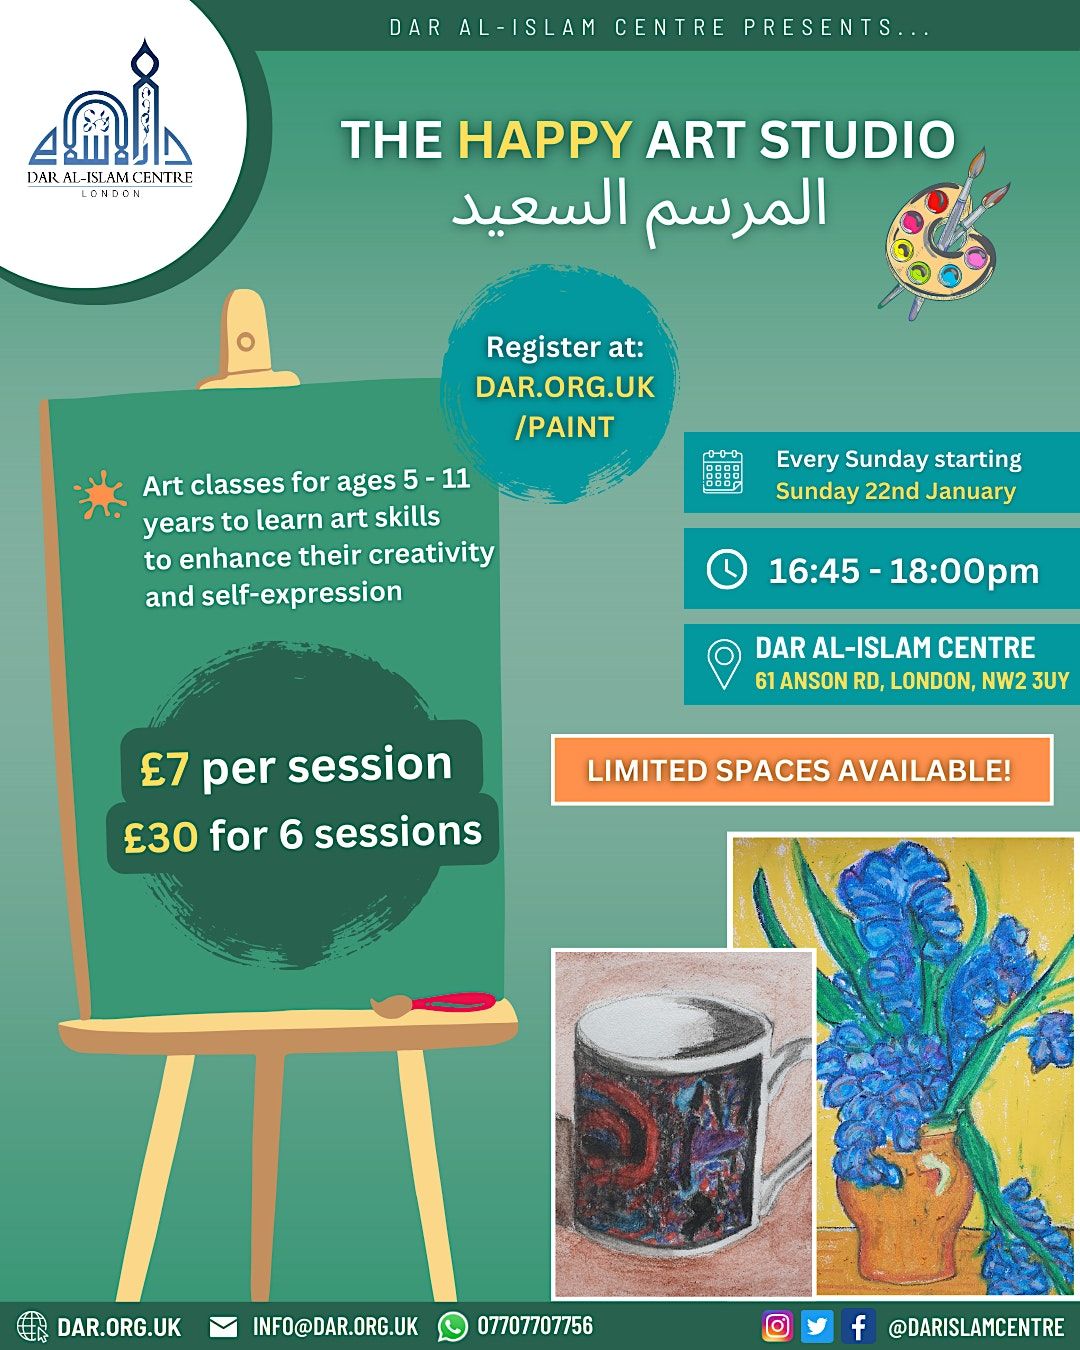 The Happy Art Studio Art Classes for 5 -11 year olds